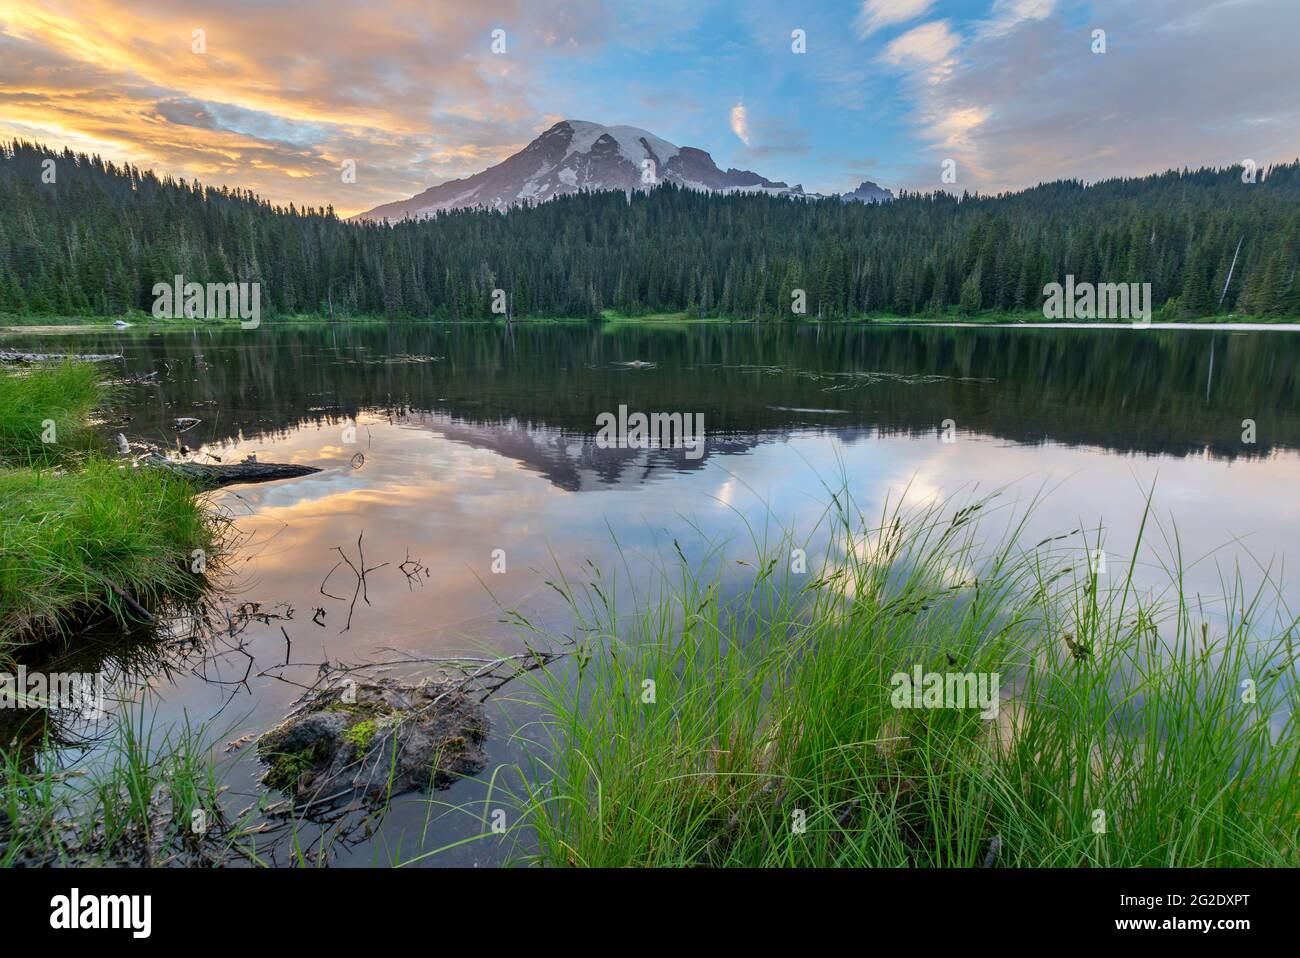 Beautiful Sunset over Reflection Lakes in Rainier National Park wth the Mountain Reflecting on the Lake Stock Photo